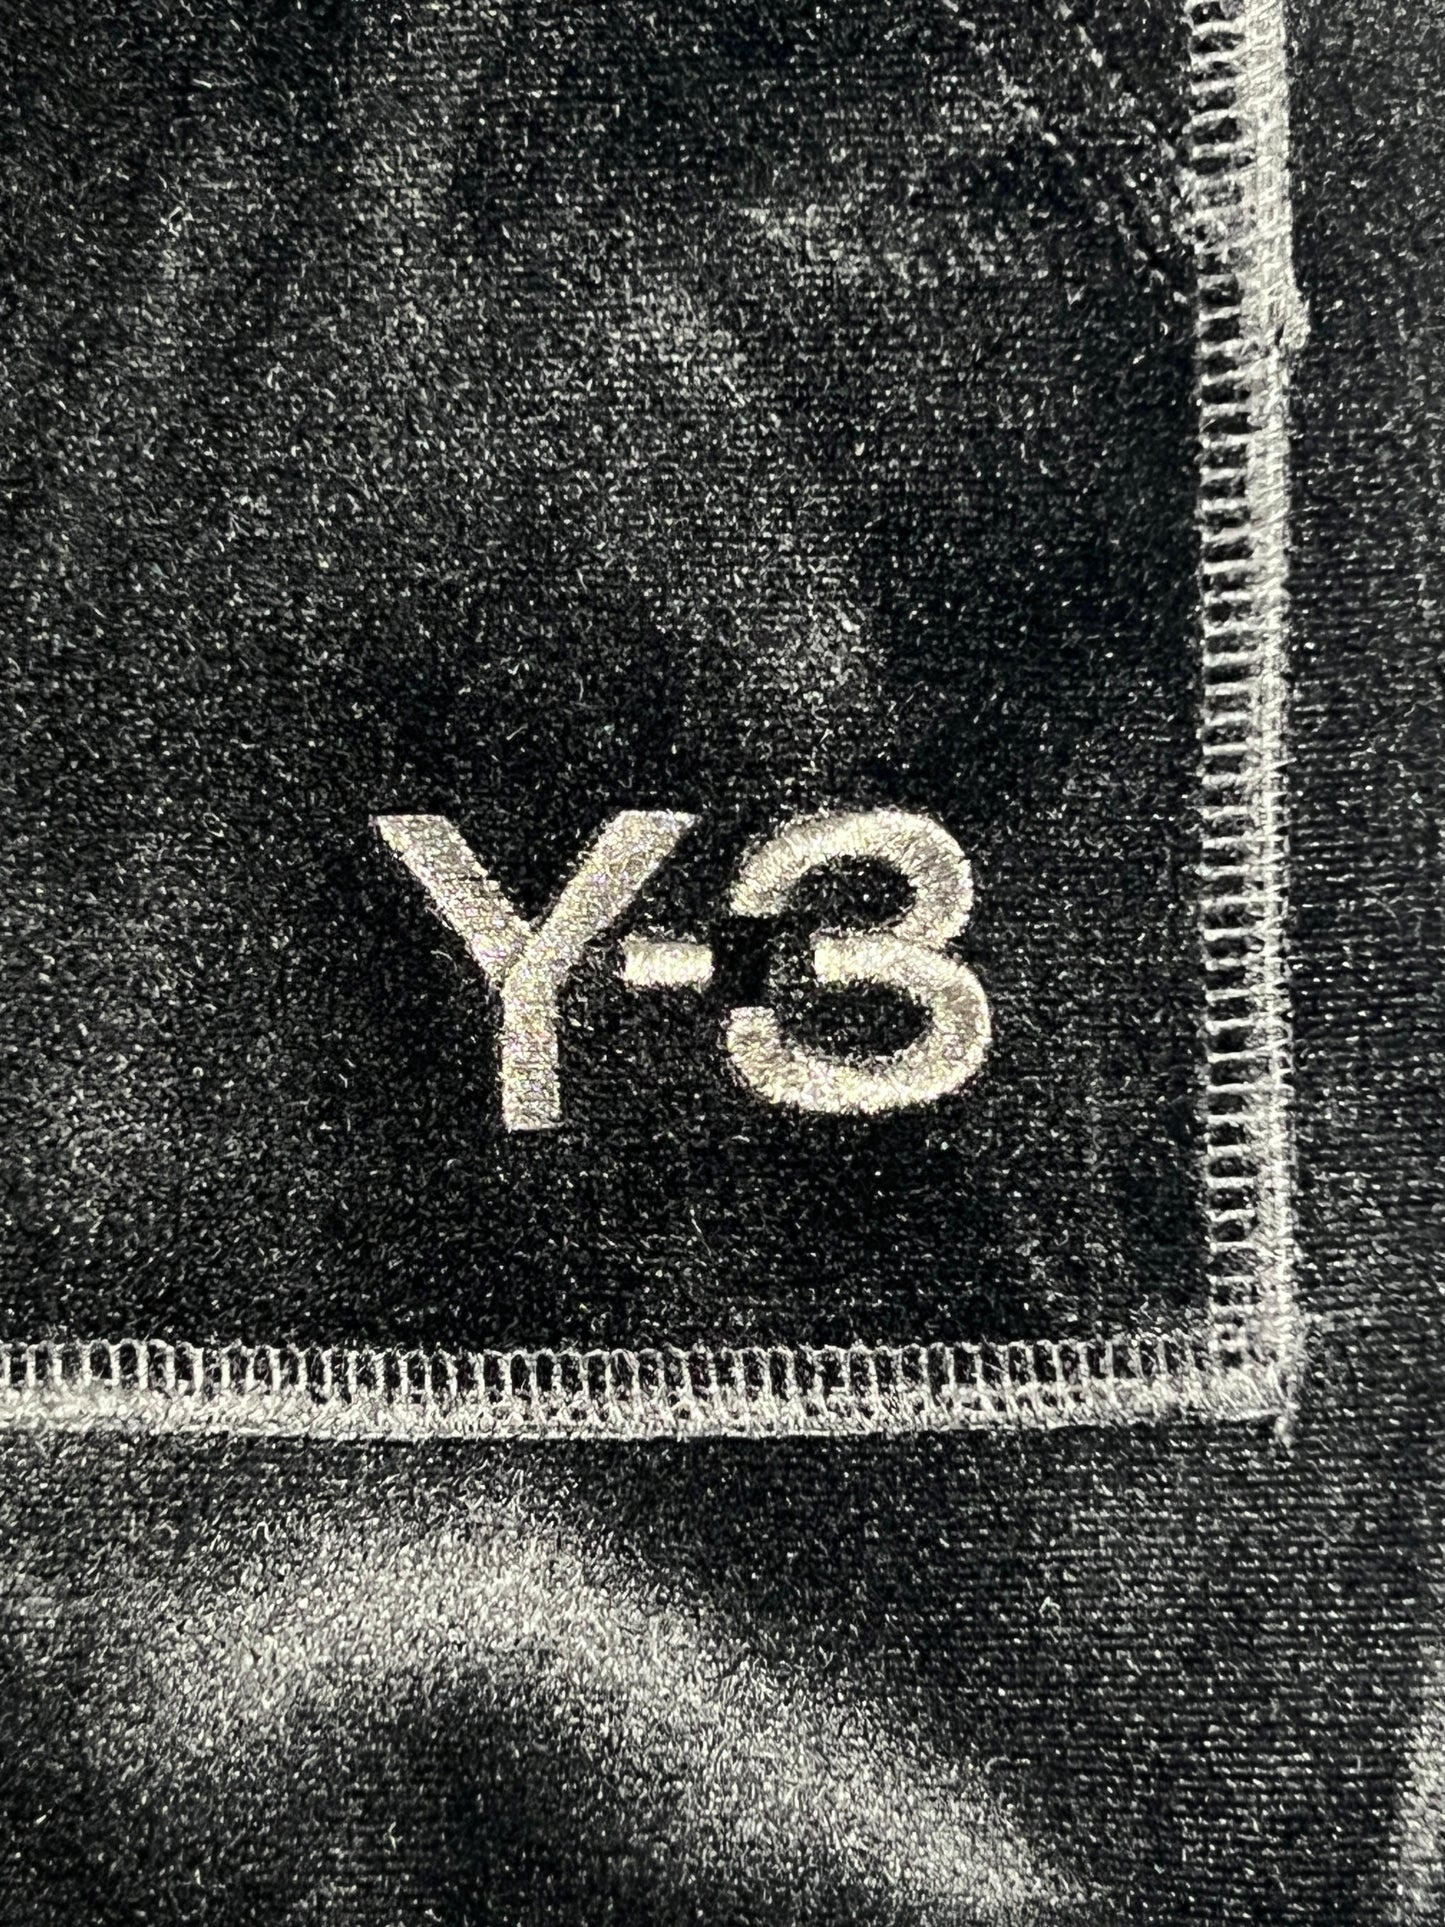 A close up of a Y-3 HOODIE IL2149 VELVET FZ HDY BLACK with the ADIDAS x Y-3 logo on it.